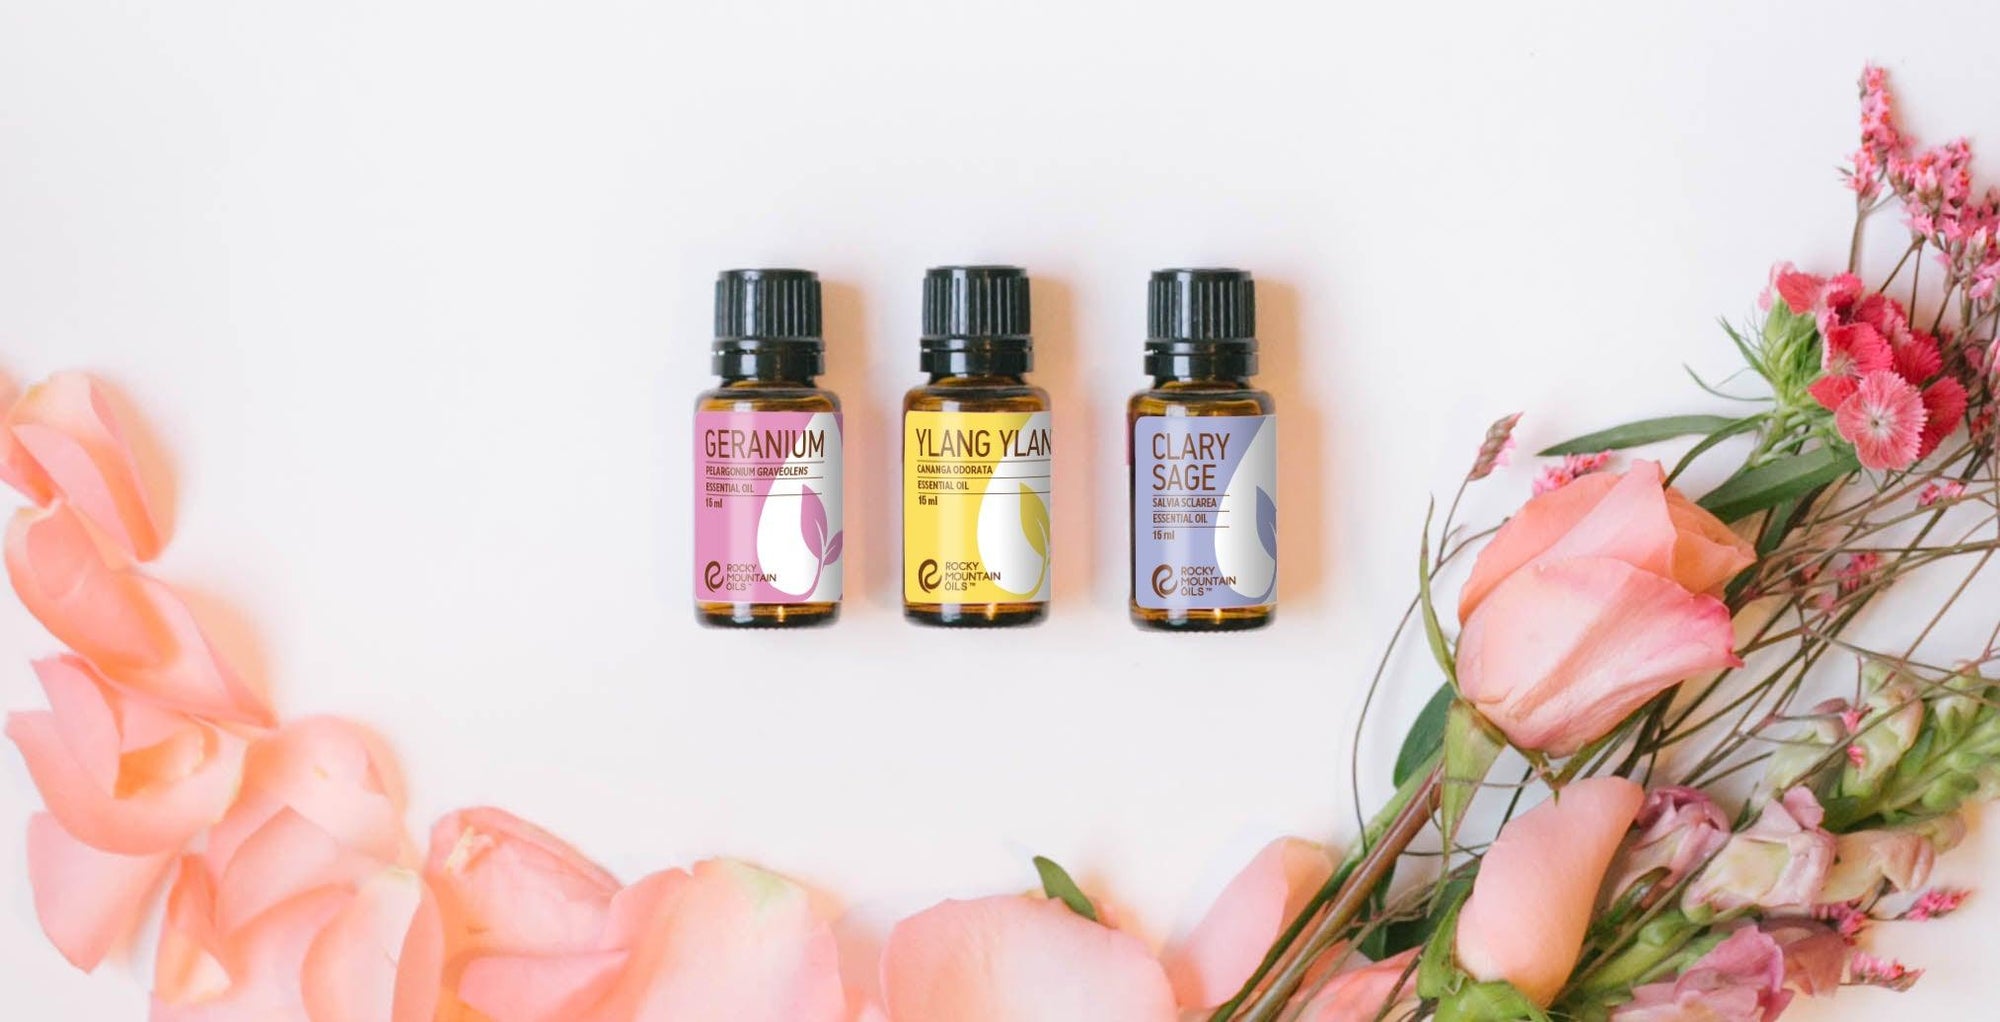 Missing An Oil? Floral Essential Oil Substitutes